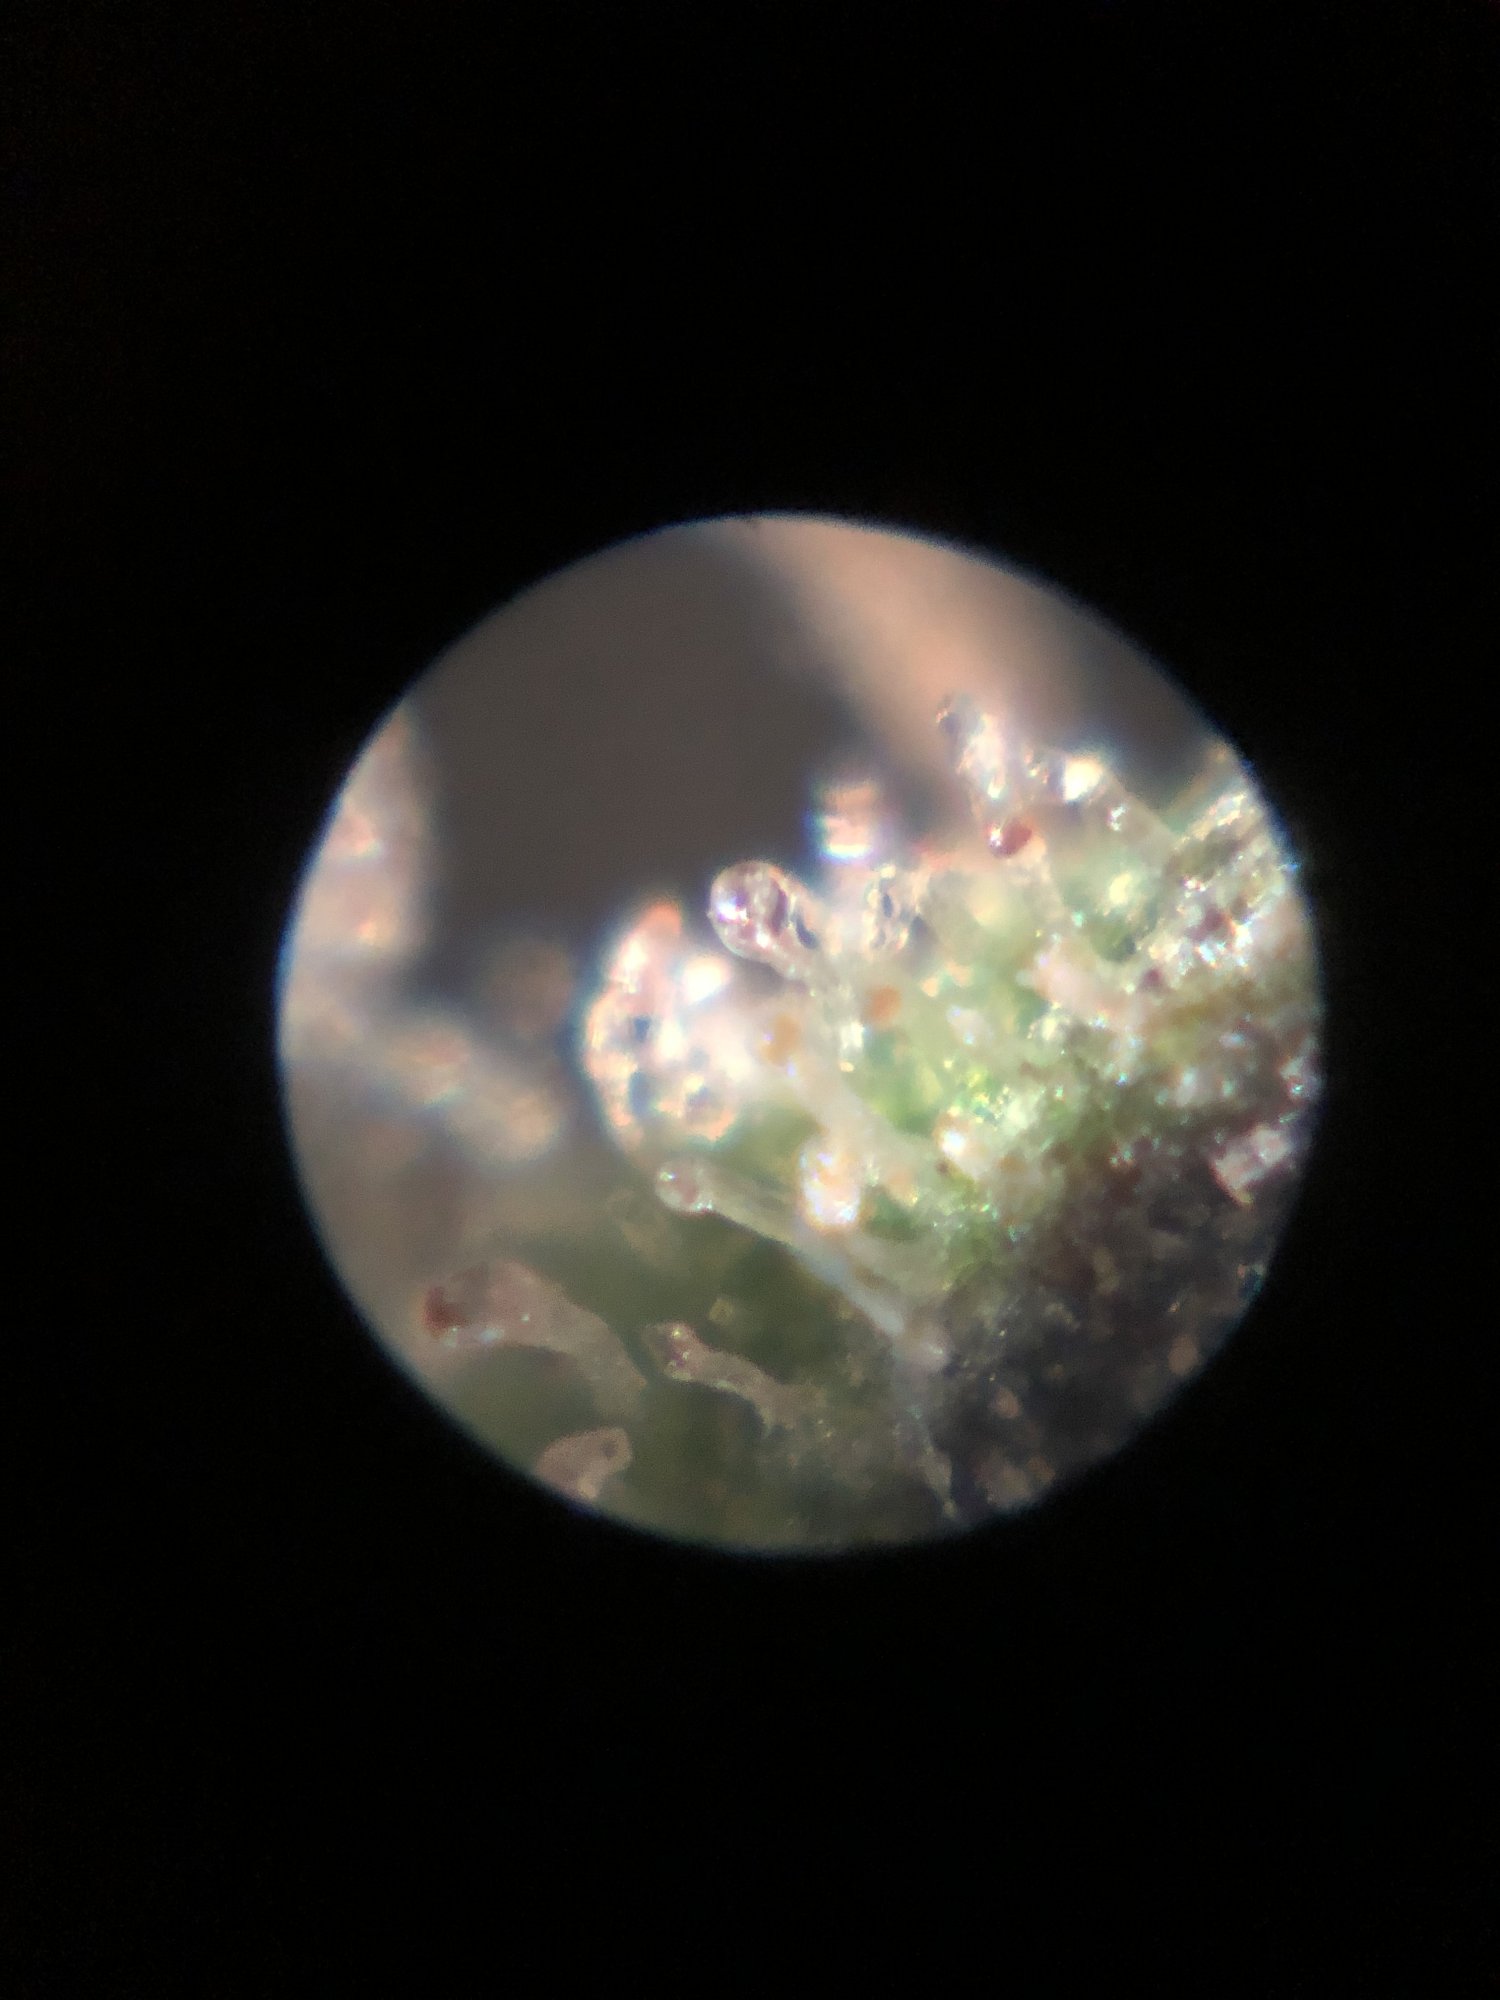 Trichomes ready for harvest 2